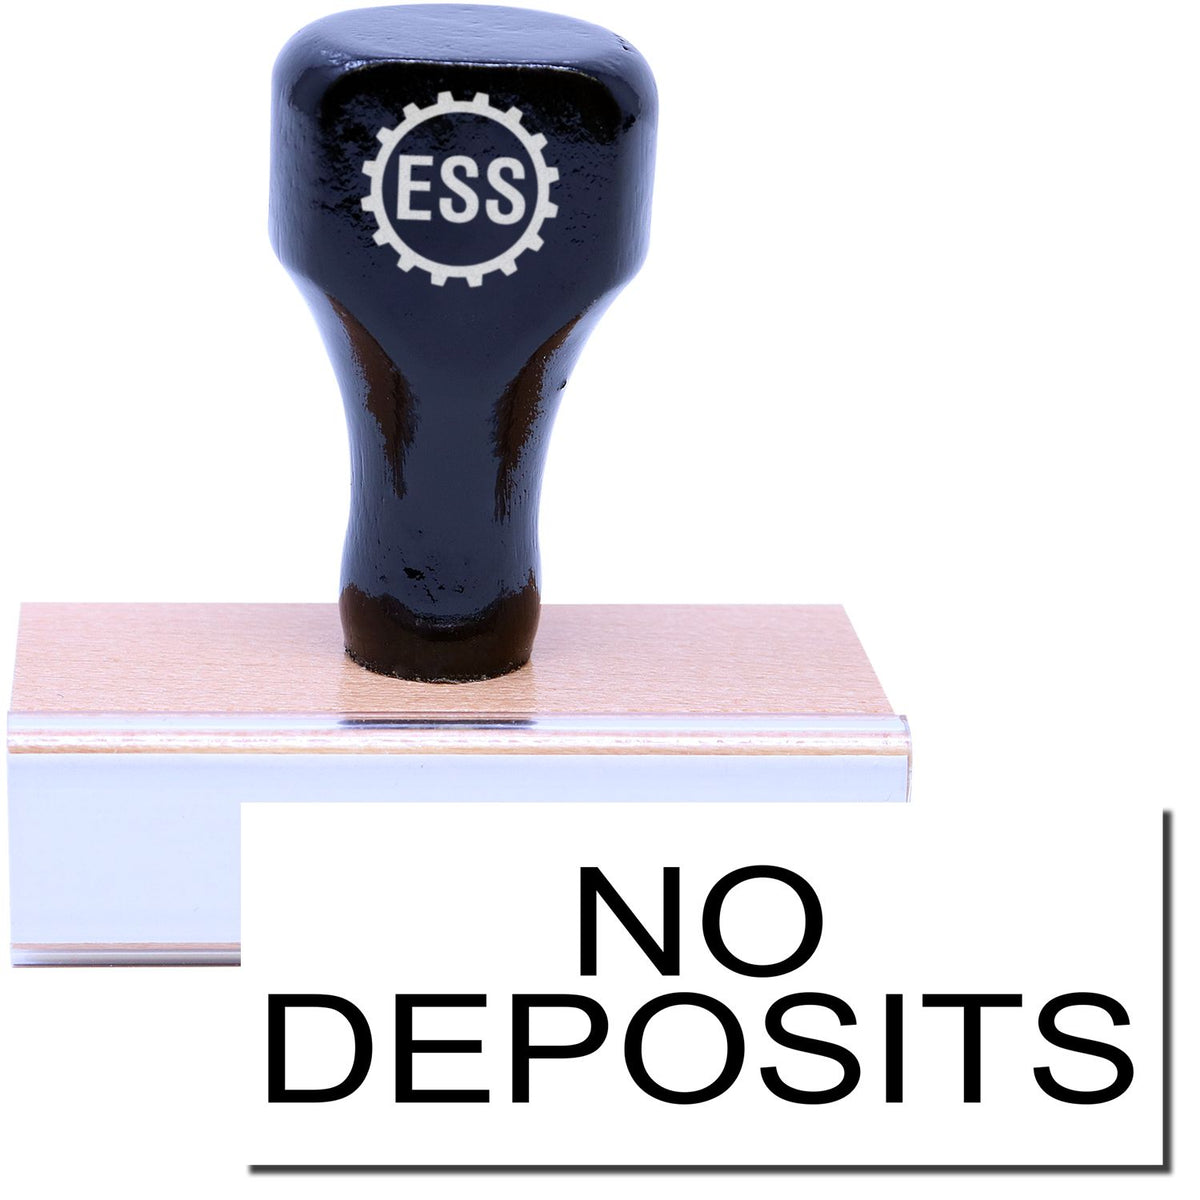 A stock office rubber stamp with a stamped image showing how the text &quot;NO DEPOSITS&quot; is displayed after stamping.